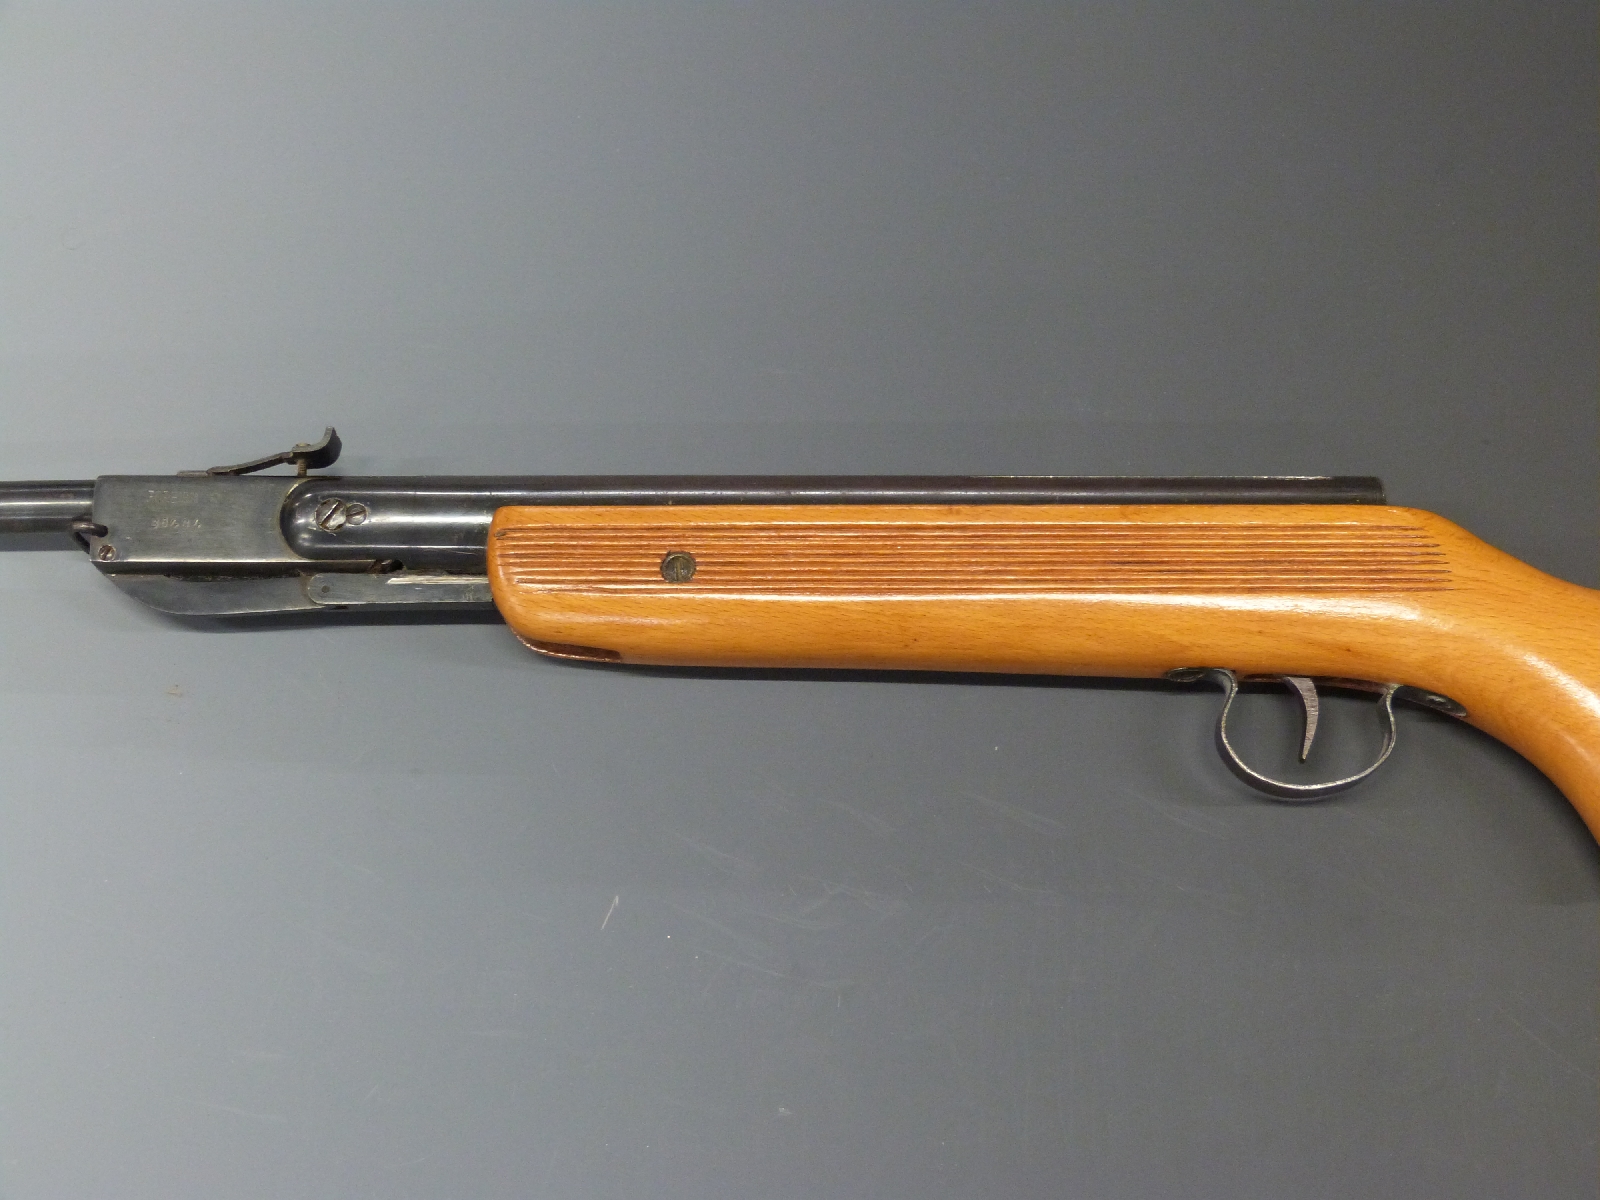 Relum Telly .22 air rifle with semi-pistol grip, raised cheek piece, sling suspension mounts and - Image 6 of 6